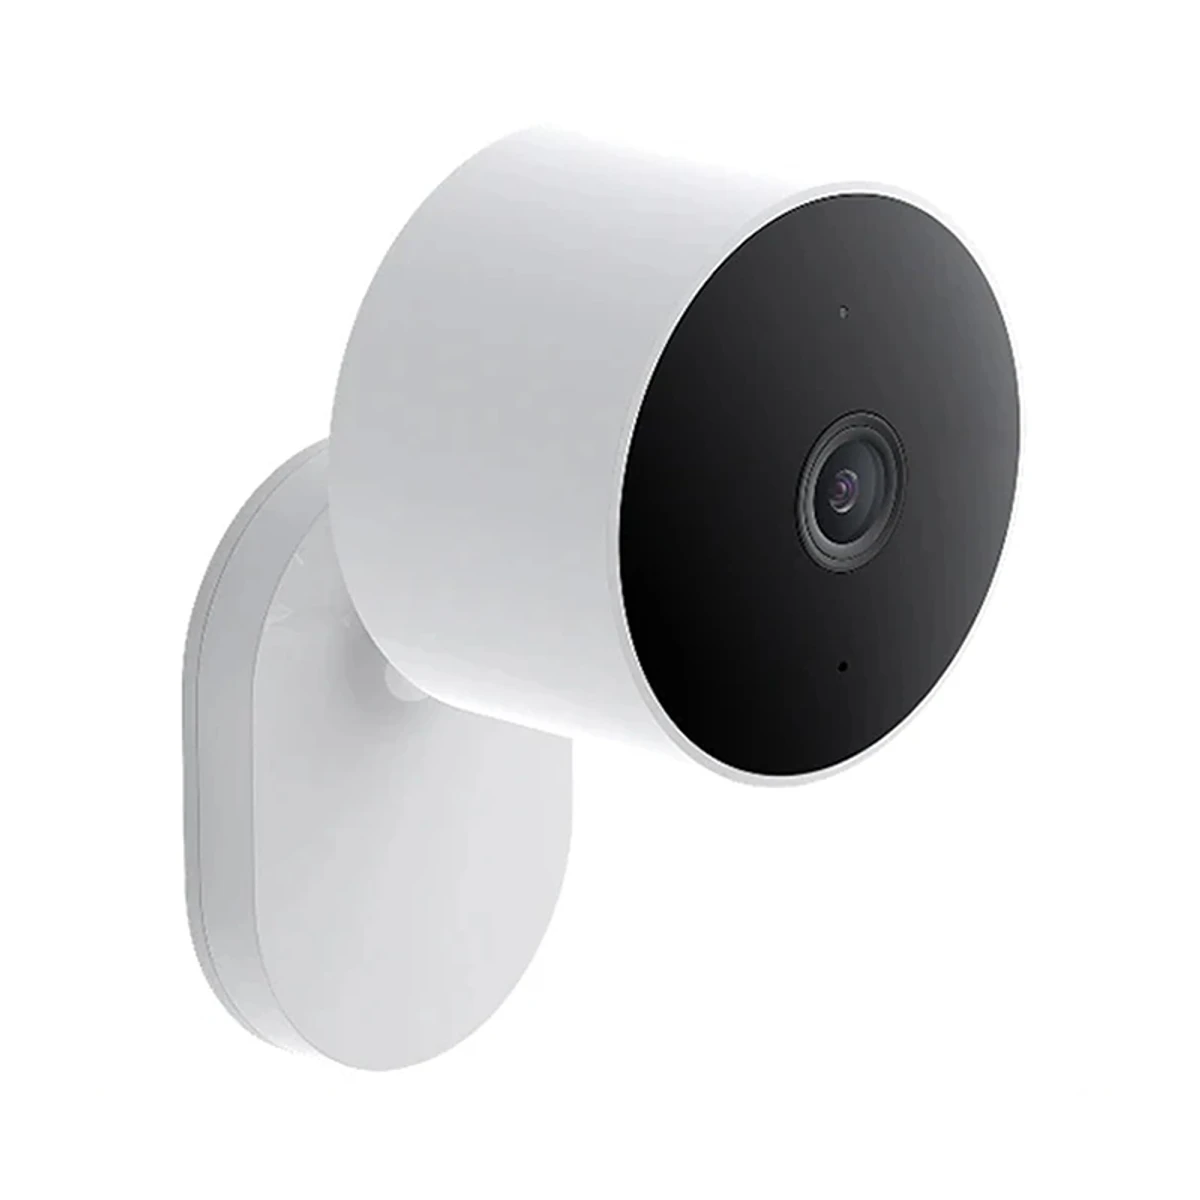 Xiaomi Outdoor Camera AW200, Security Camera Weatherproof Outdoor Security, 1080p Colour Night Vision, Two-Way Voice Calls, Motion Detection, Works with Alexa & Google Home, Time-Lapse Photography